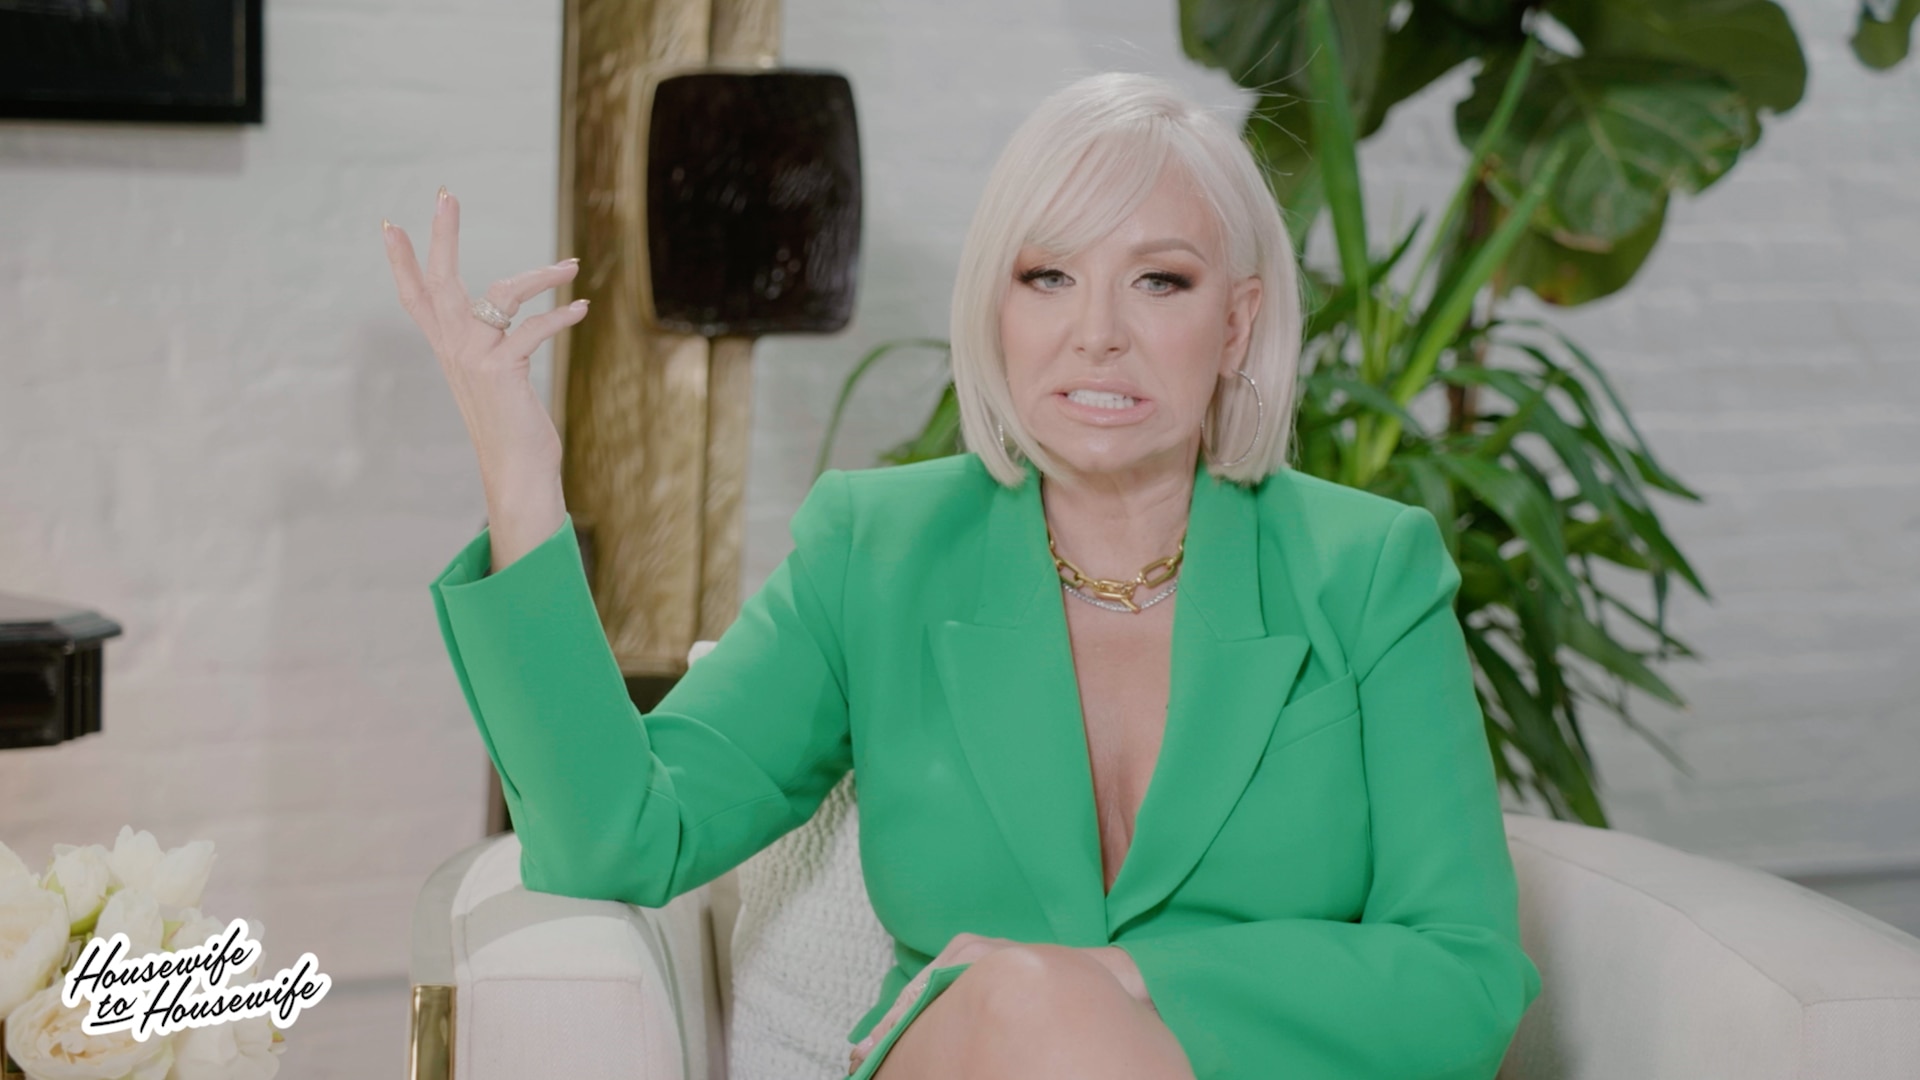 Margaret Josephs and Noella Bergener Recall the Moments They Wanted to "Quit" Real Housewives